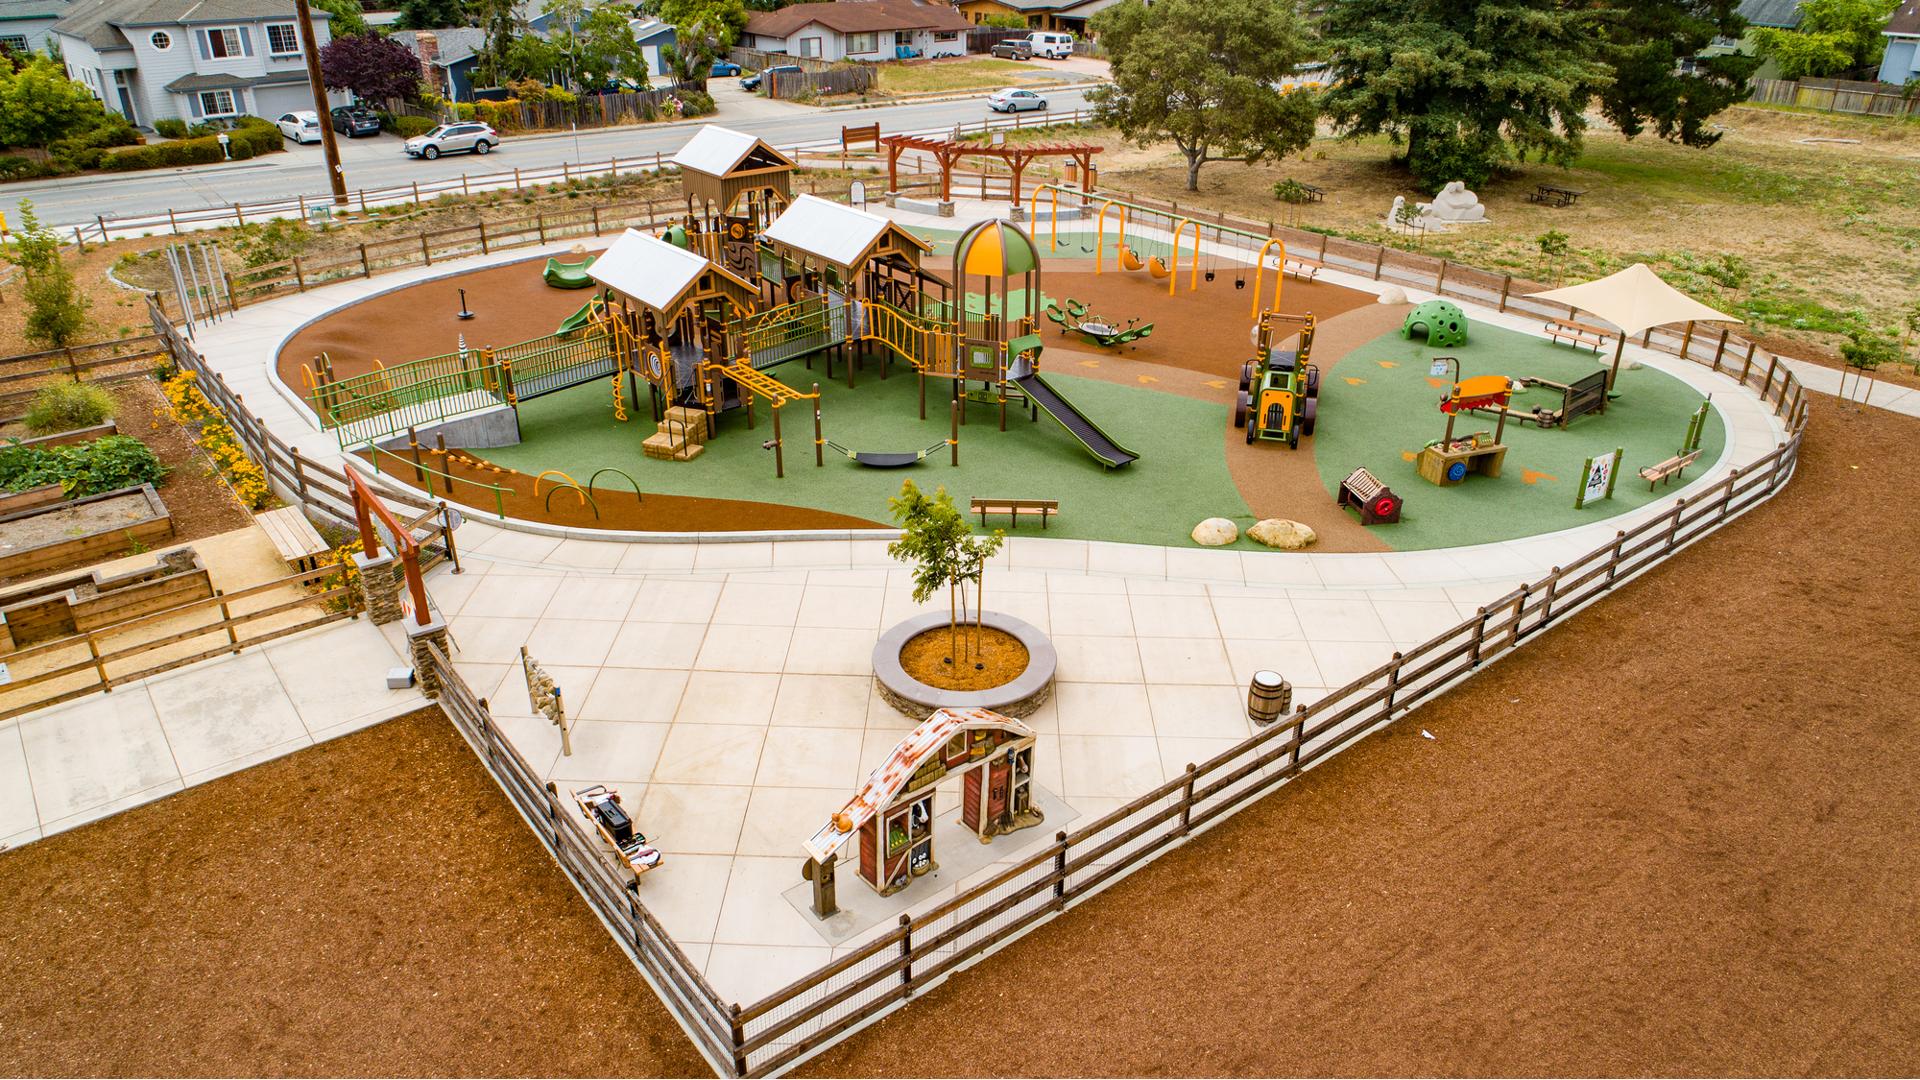 Elevated view of a farm themed inclusive play area with tractor climber, barn themed sensory wall, and large barn themed play structure.